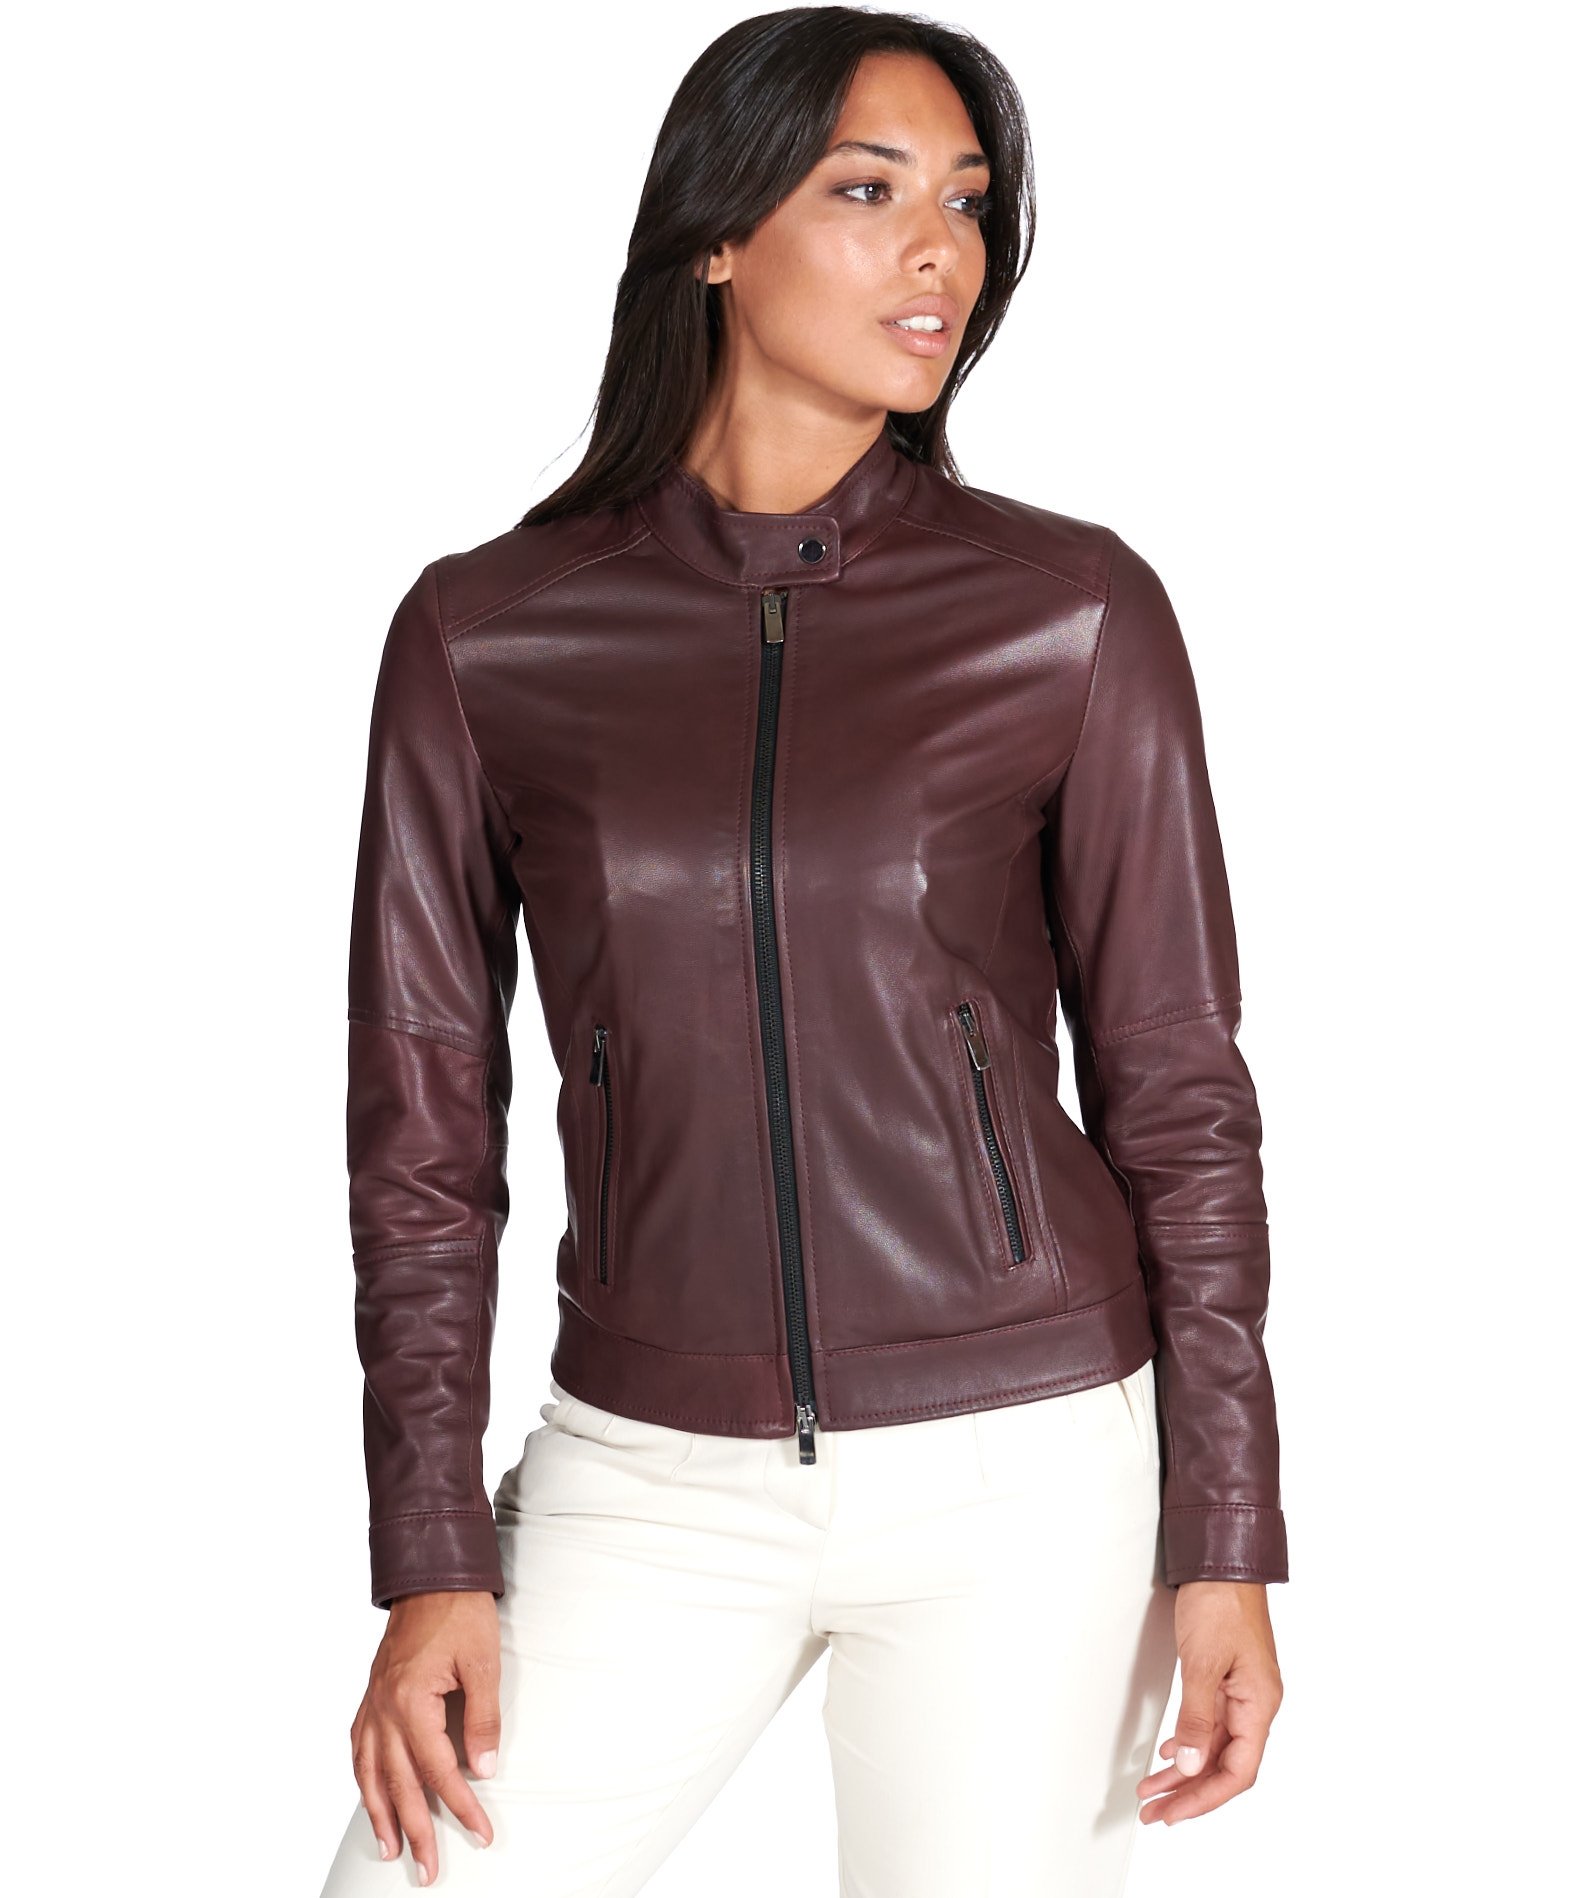 Buy Leather Jackets for Women Online in India | VeroModa-thanhphatduhoc.com.vn